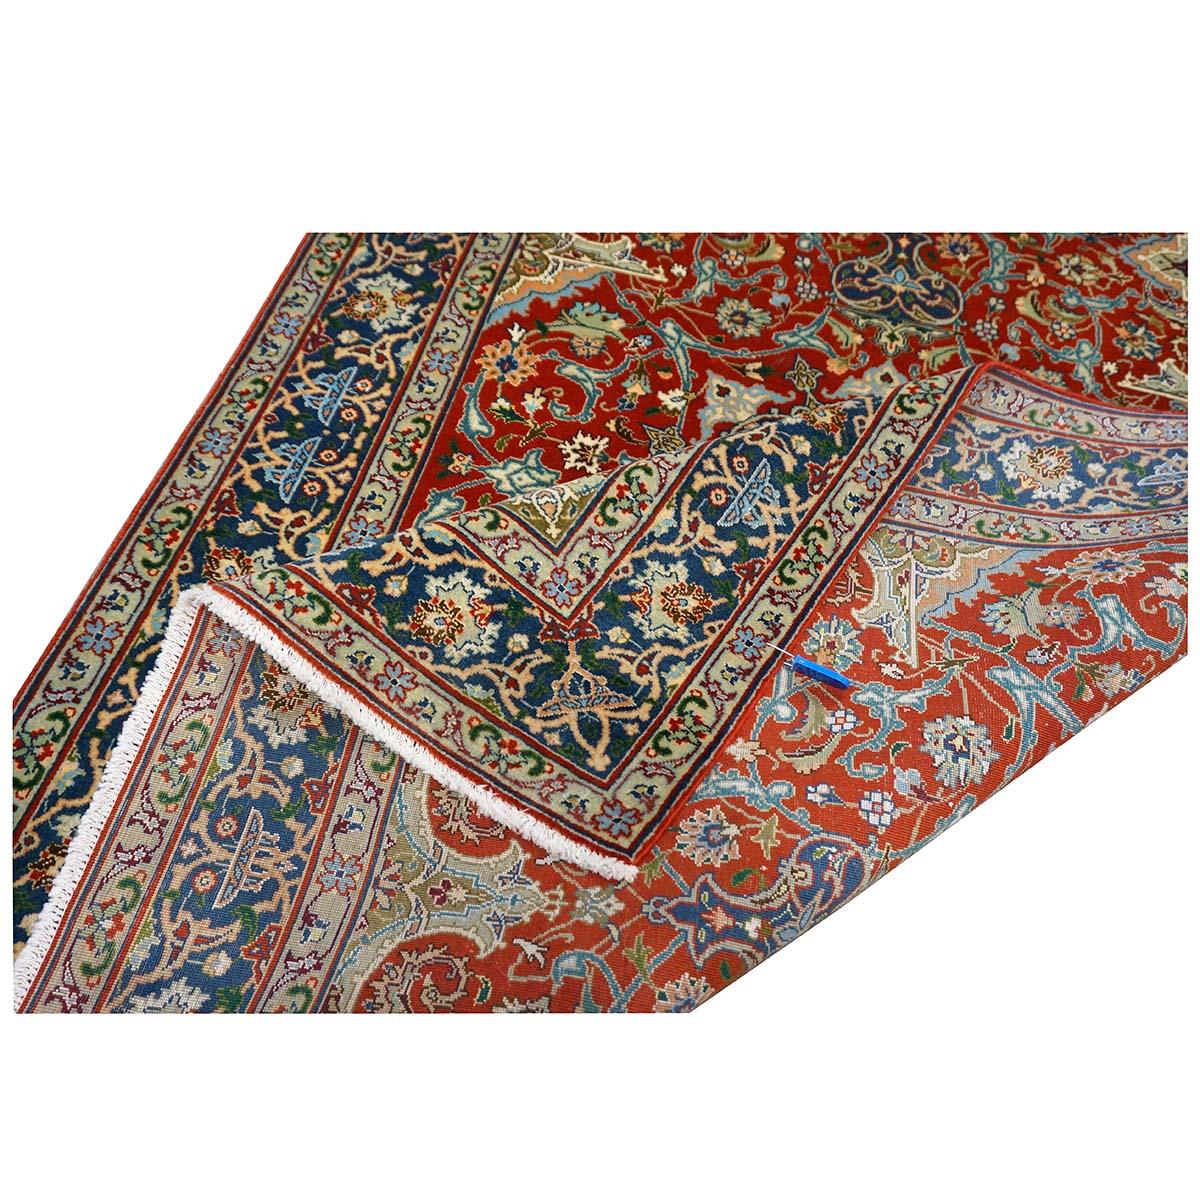 Antique 1940s Fine Persian Tabriz 3x4 Red, Navy, & Blue Handmade Area Rug For Sale 5